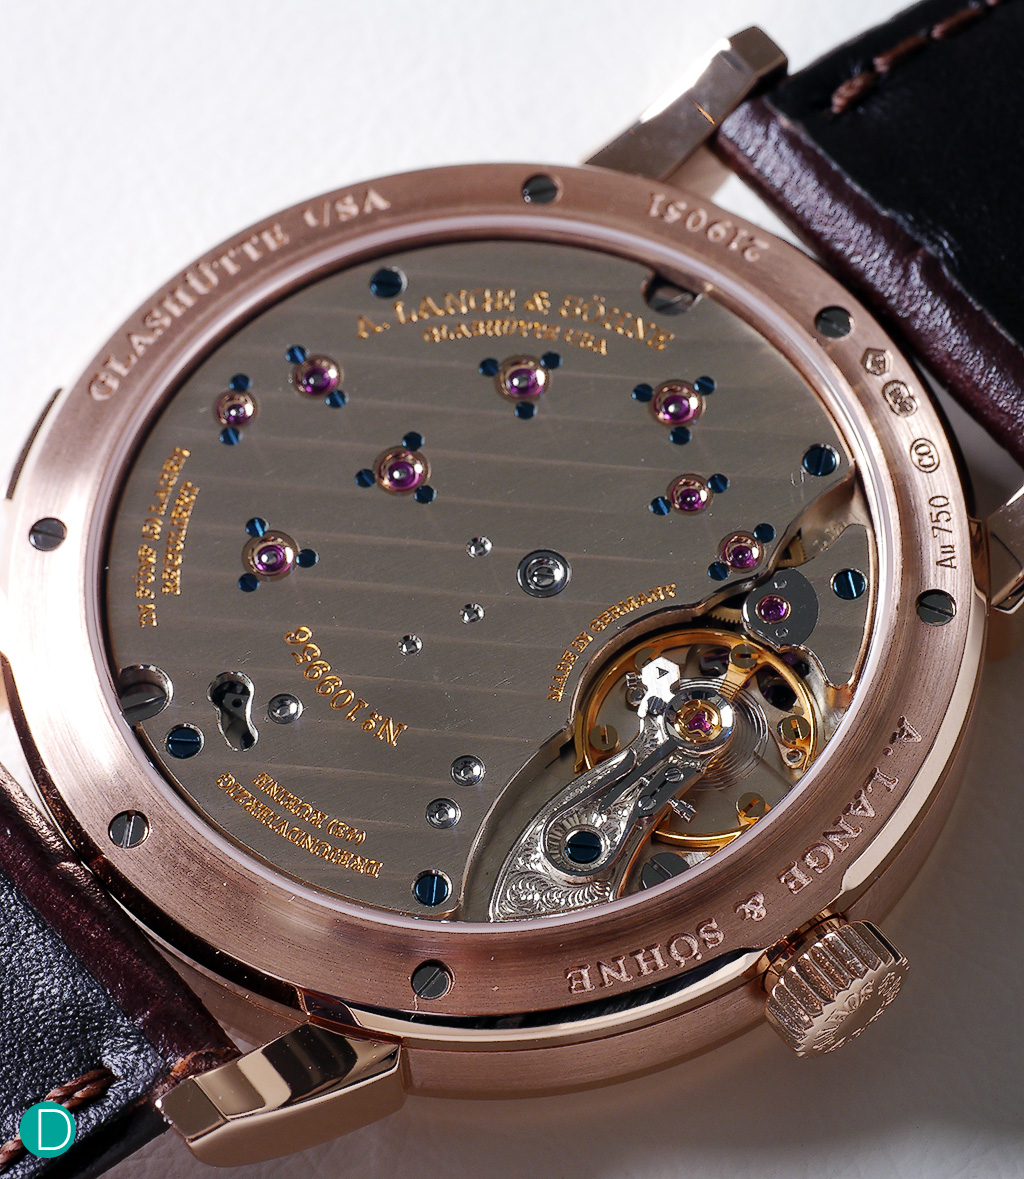 The new Lange 1 movement. Caliber L121.1, now featuring the inhouse manufactured balance system with eccentric weights.